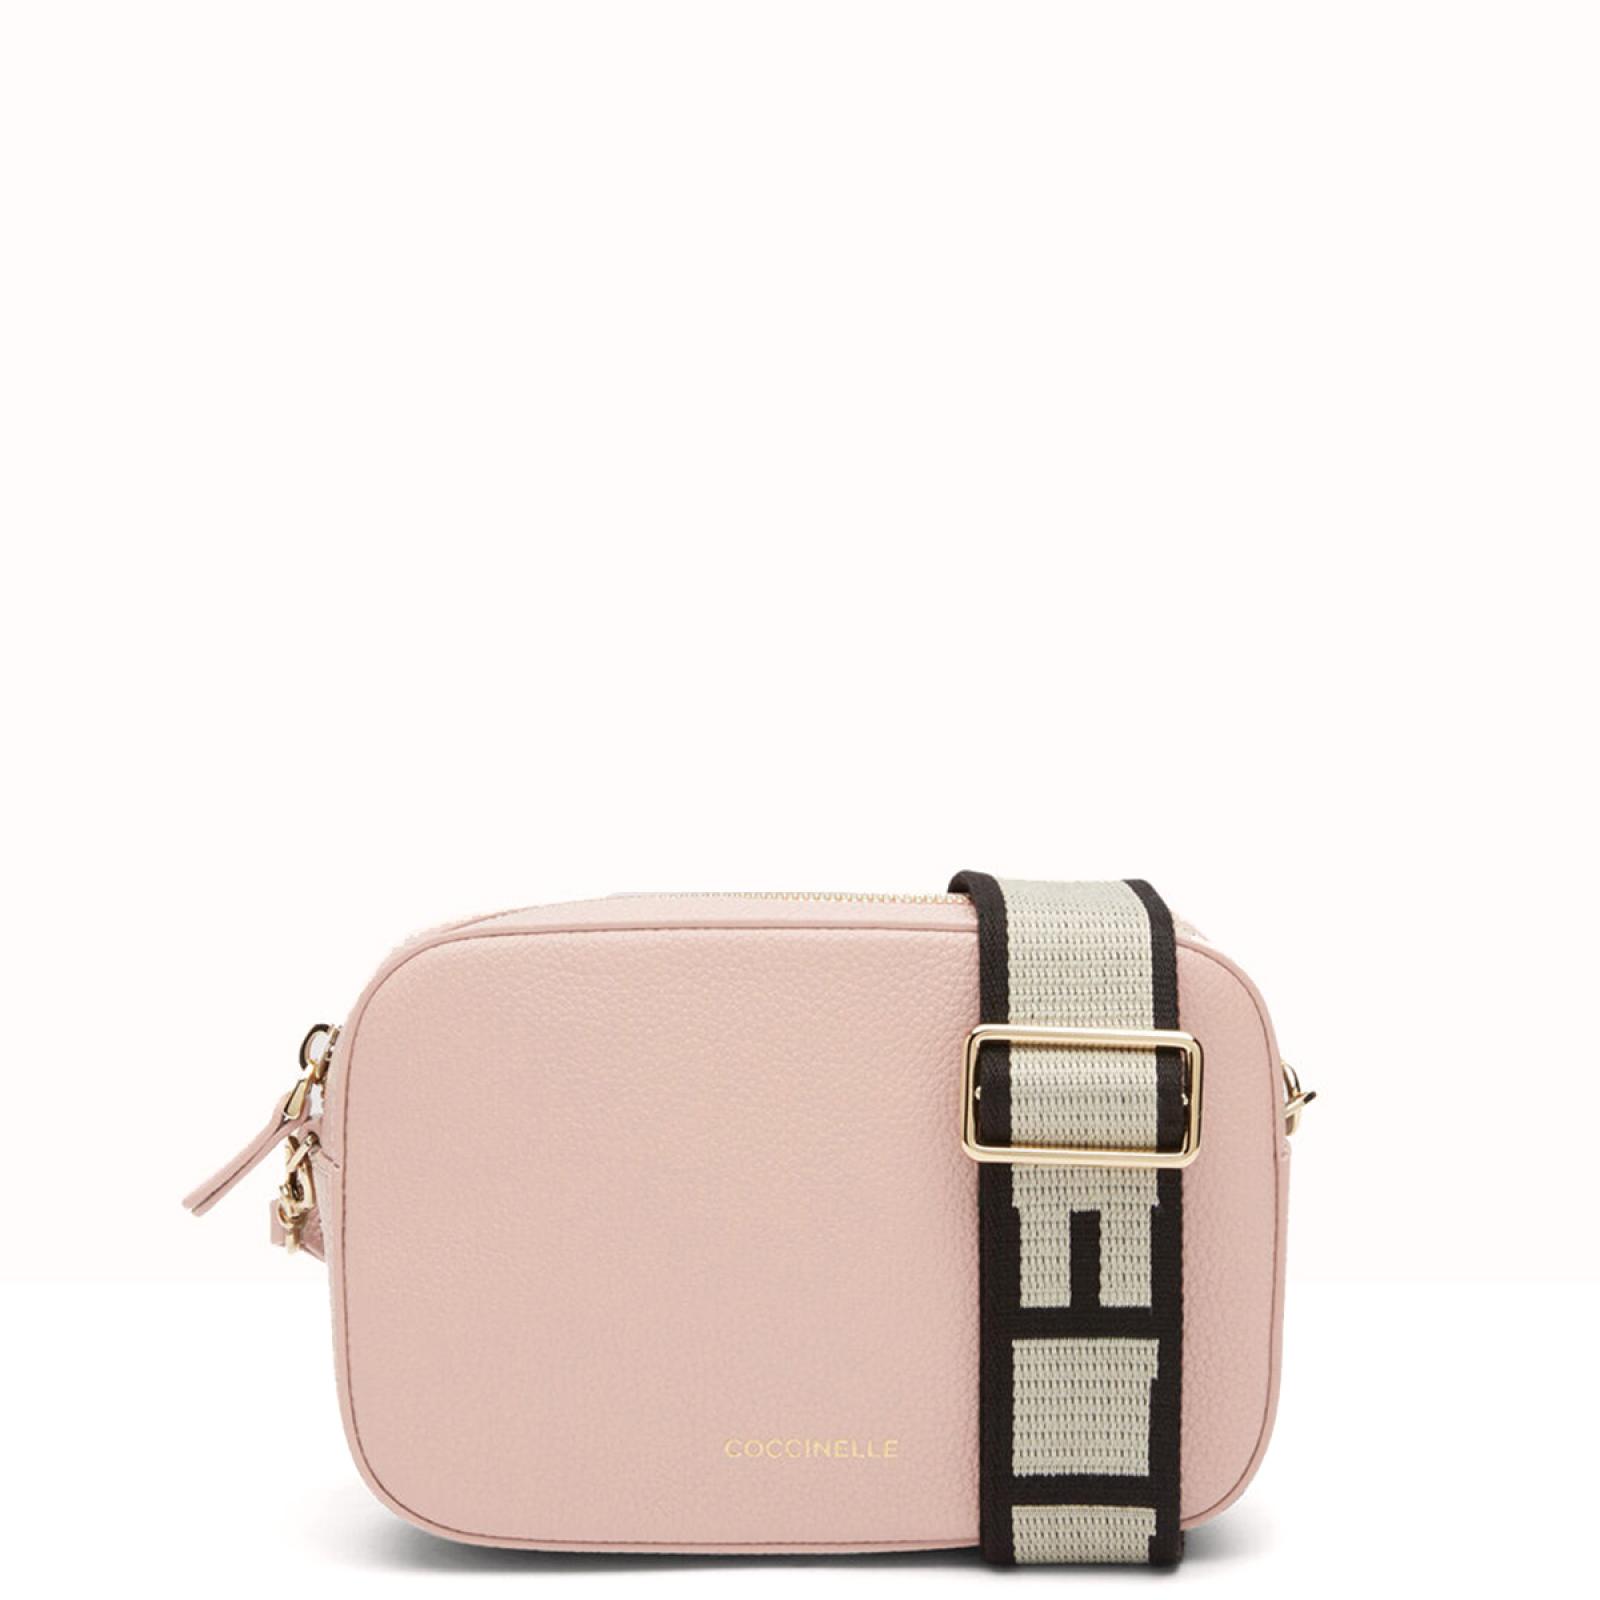 Coccinelle Minibag Tebe New Pink - 1